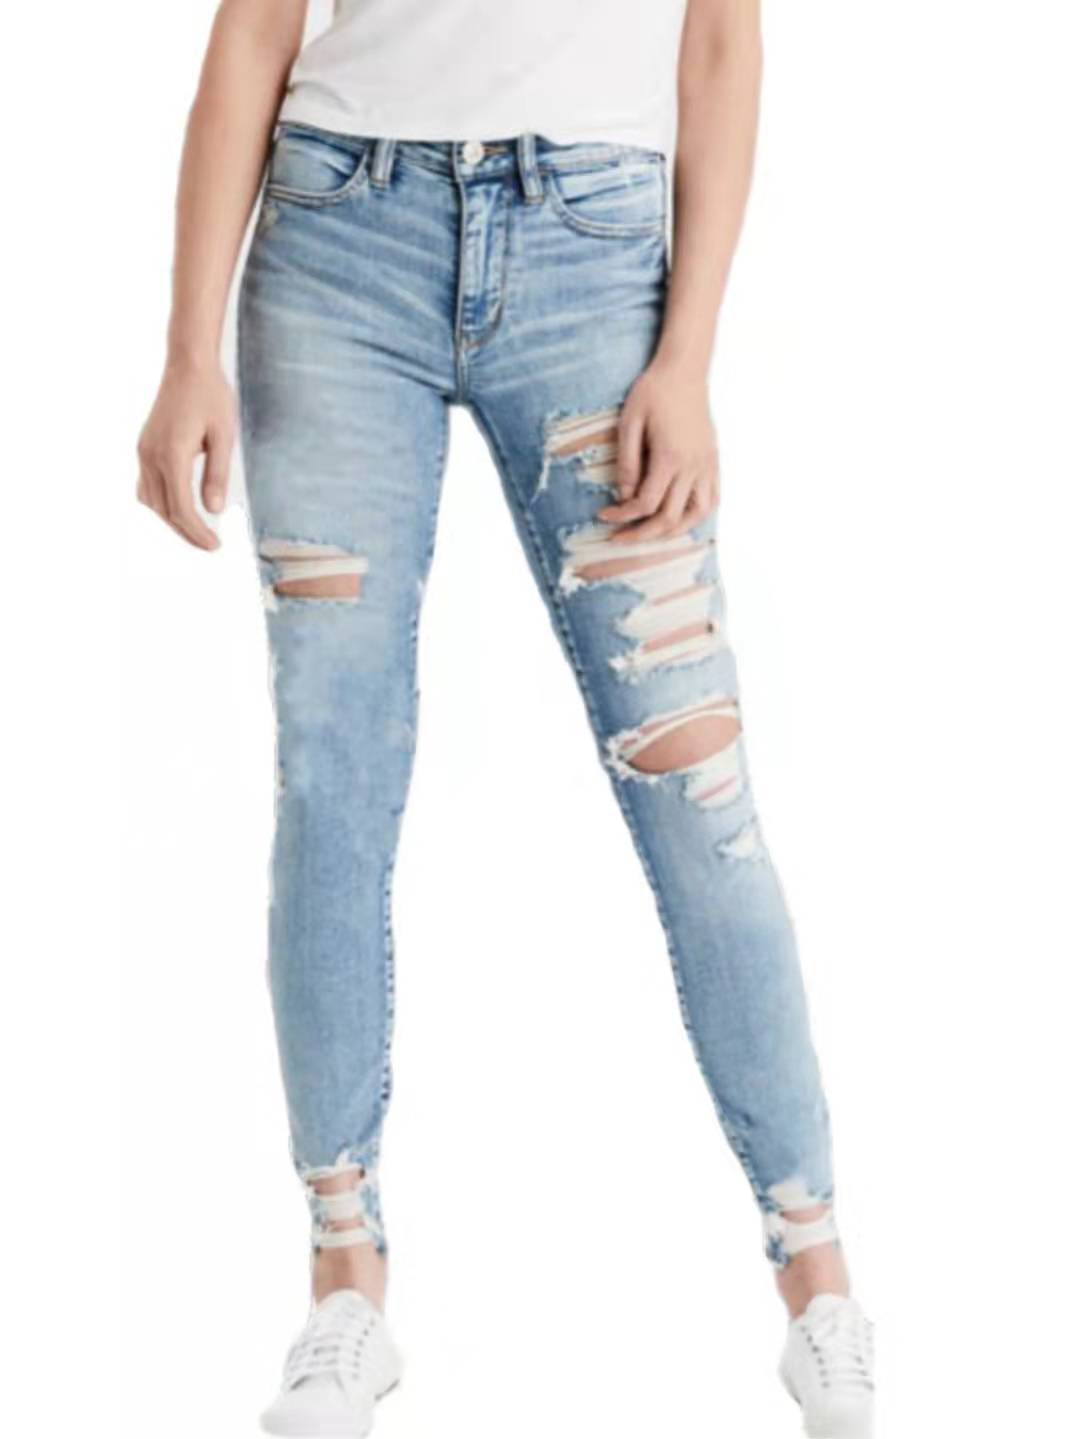 high waisted denim ripped jeans